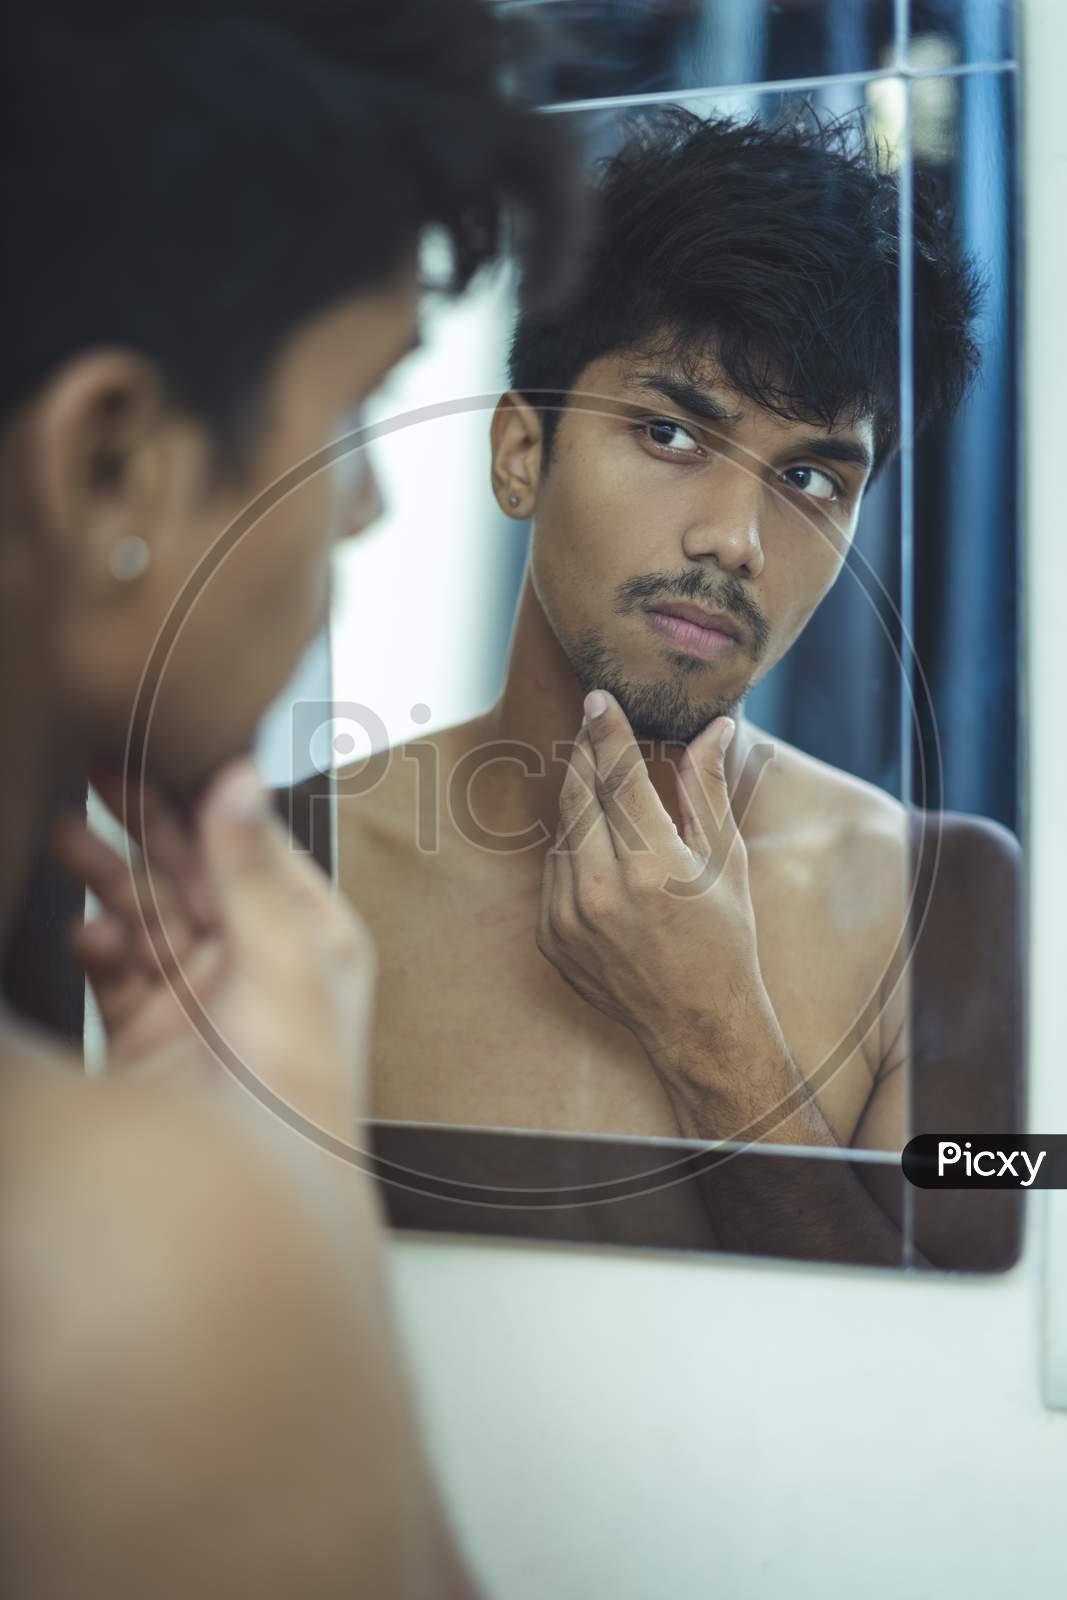 Handsome Caucasian Man Looking At Himself At The Mirror Bathroom